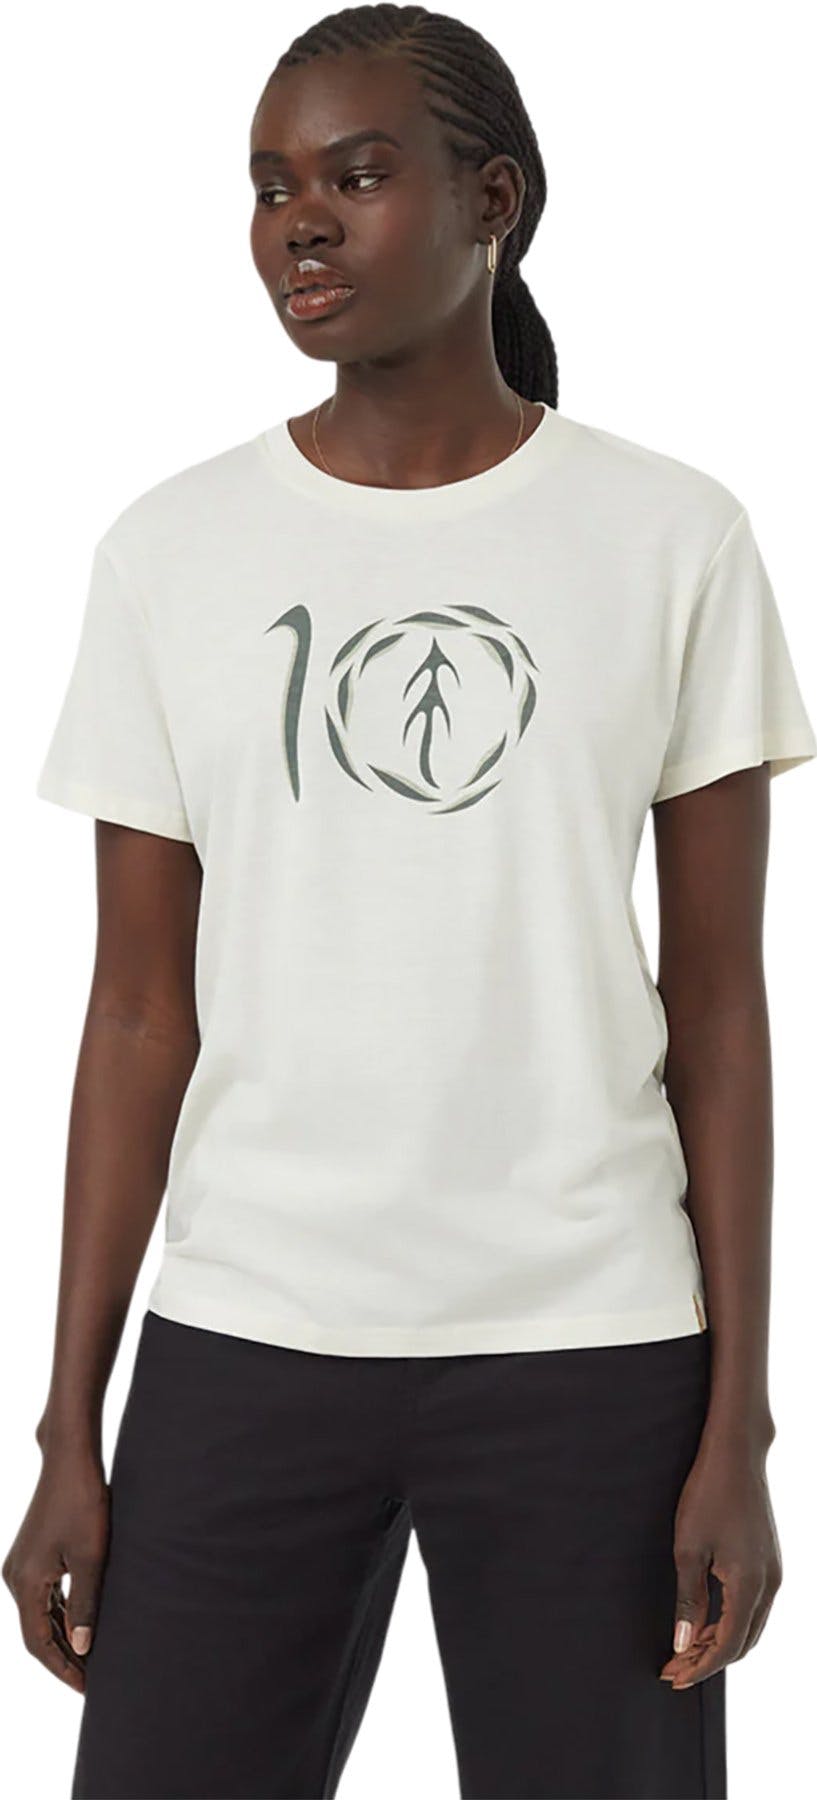 Product image for Artist Series Leaf Ten T-Shirt - Women's